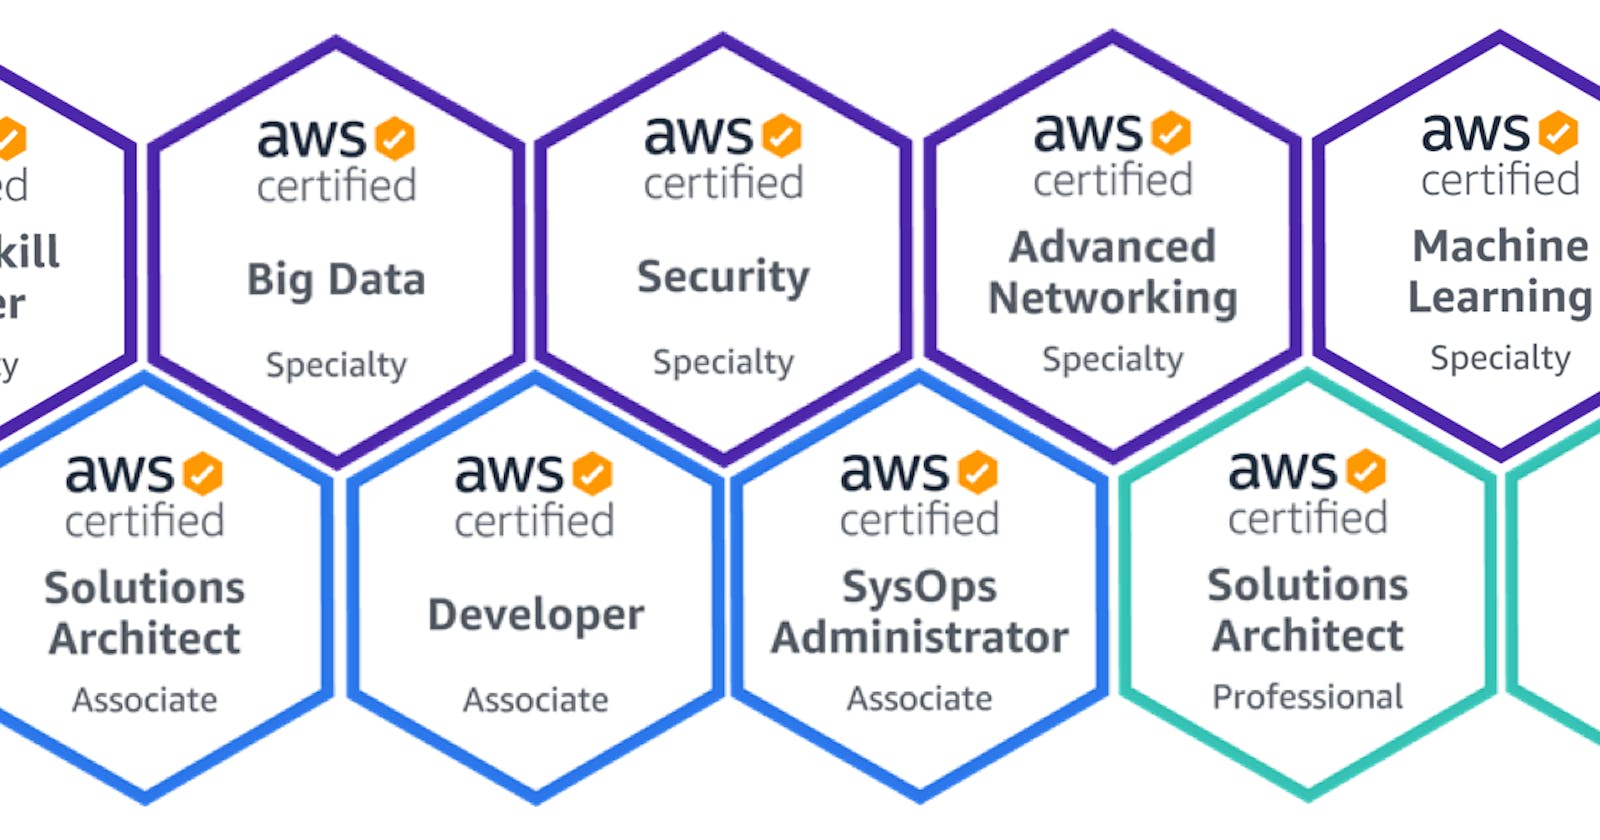 Everything you need to know about AWS Certifications